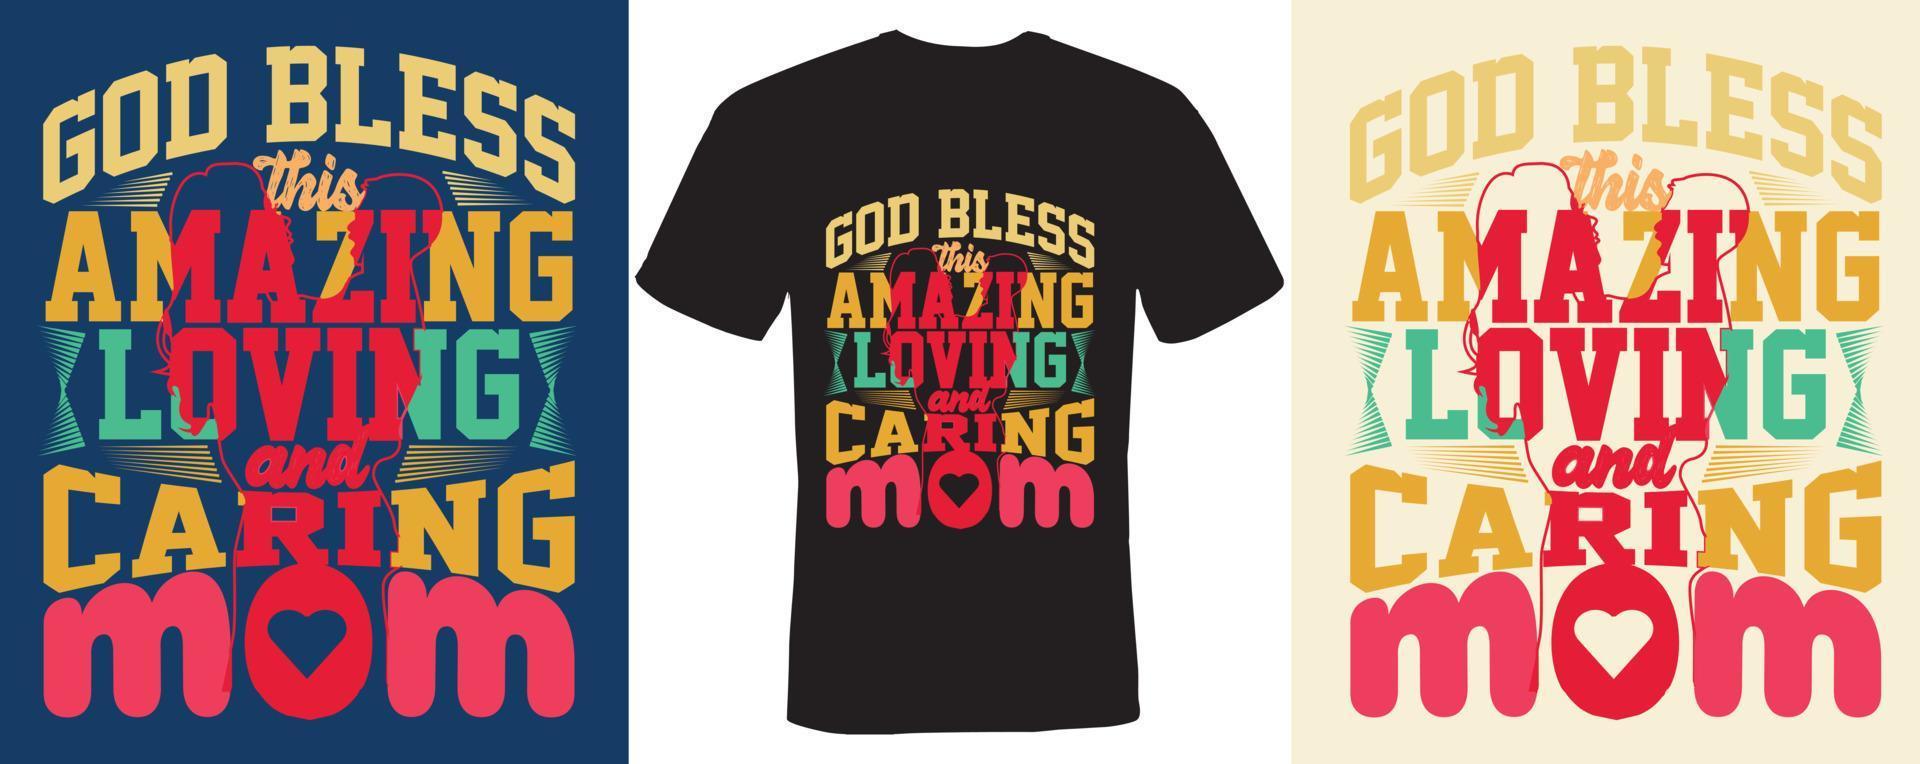 God bless this amazing loving and caring mom T-shirt design for Mom vector